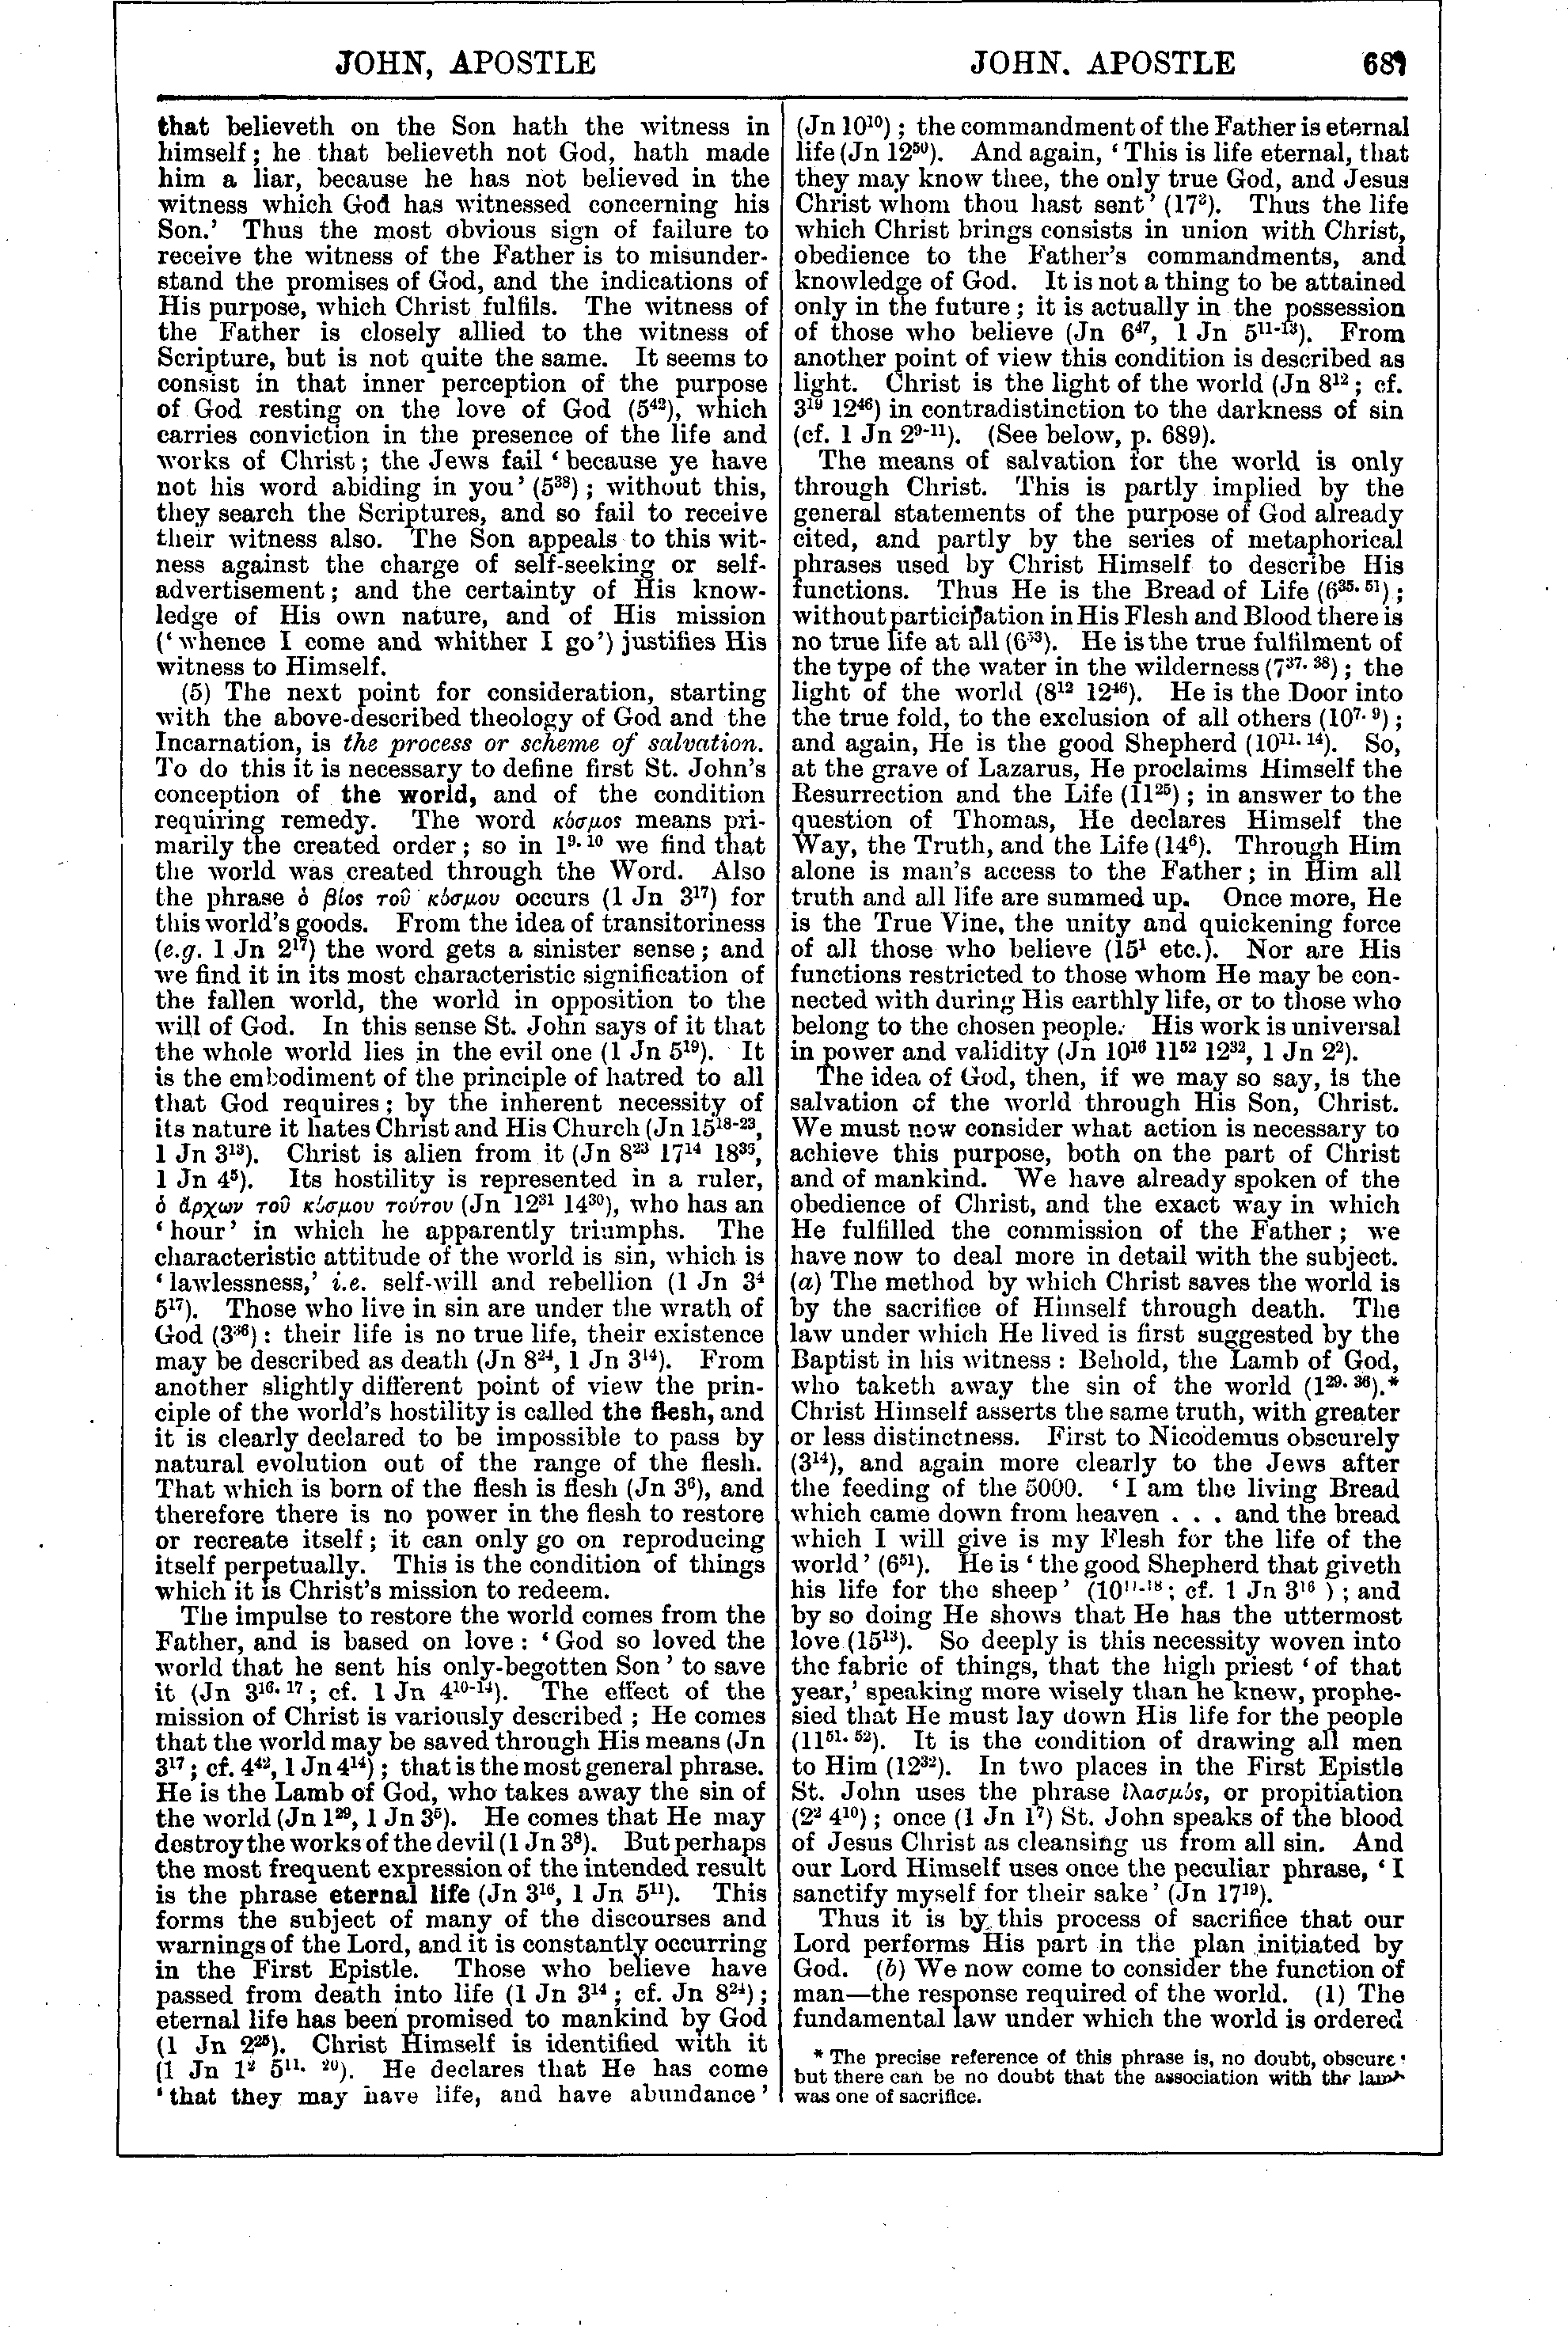 Image of page 687